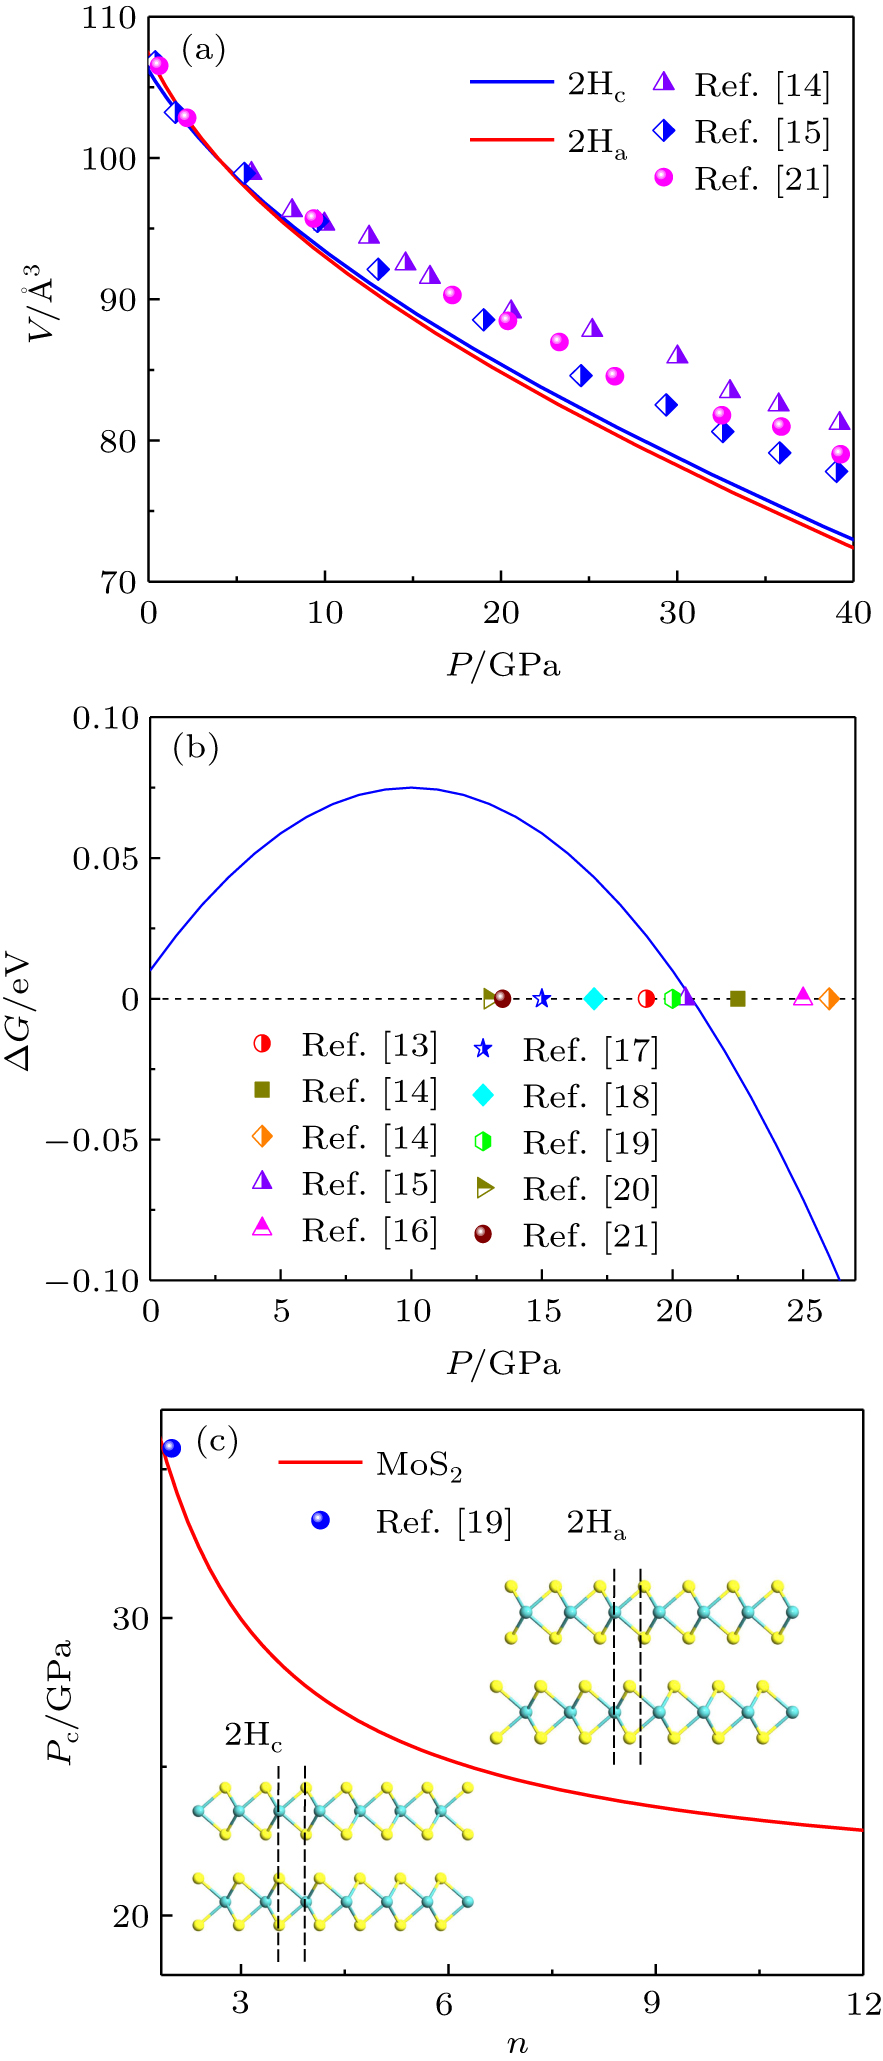 (a) Pressure-dependent unit volume of MoS2 in both 2Hc and 2Ha phases. (b) Pressure-dependent relative Gibbs free energy of 2Ha- and 2Hc-MoS2 phases. (c) Phase diagram of MoS2 from 2Hc-to-2Ha as a function of thickness. The solid line is the dividing line.